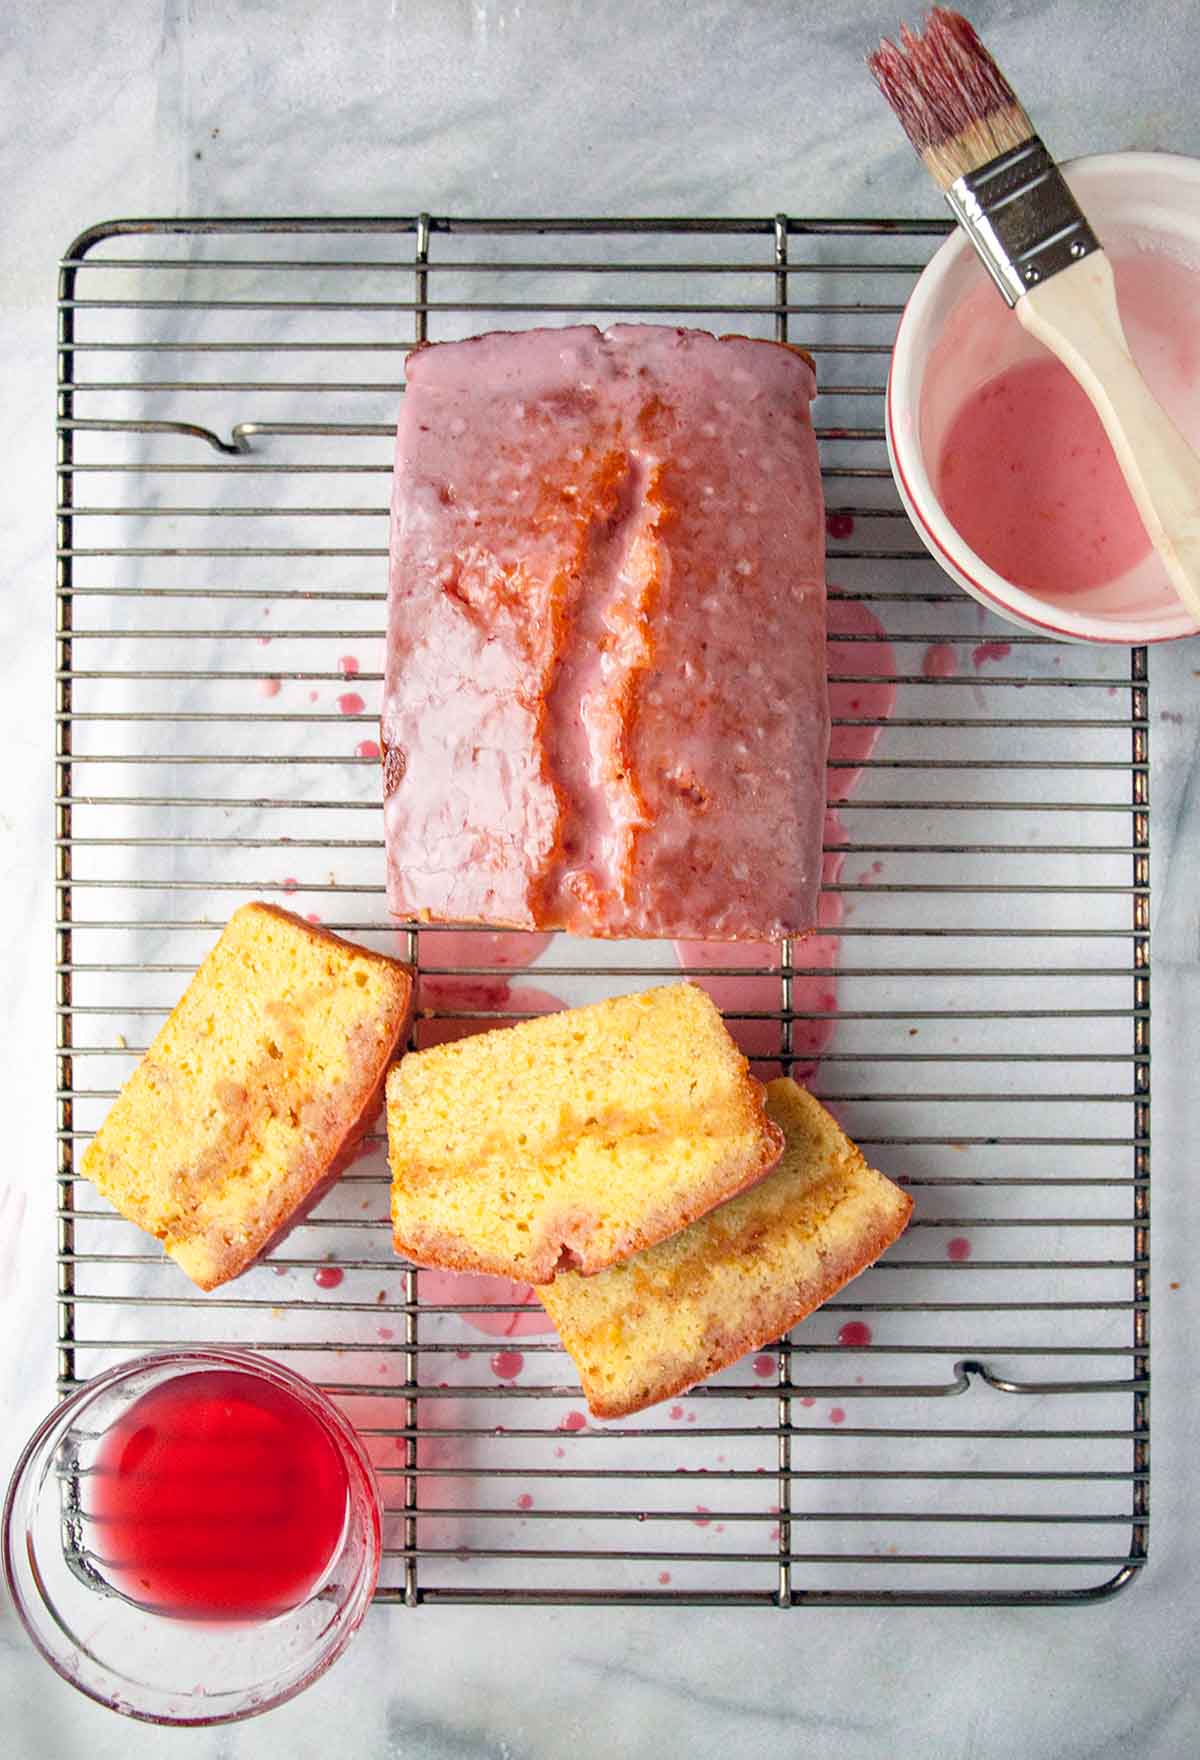 A blood orange pound cake on a wire rack with glaze and sugar syrup, three slices cut.